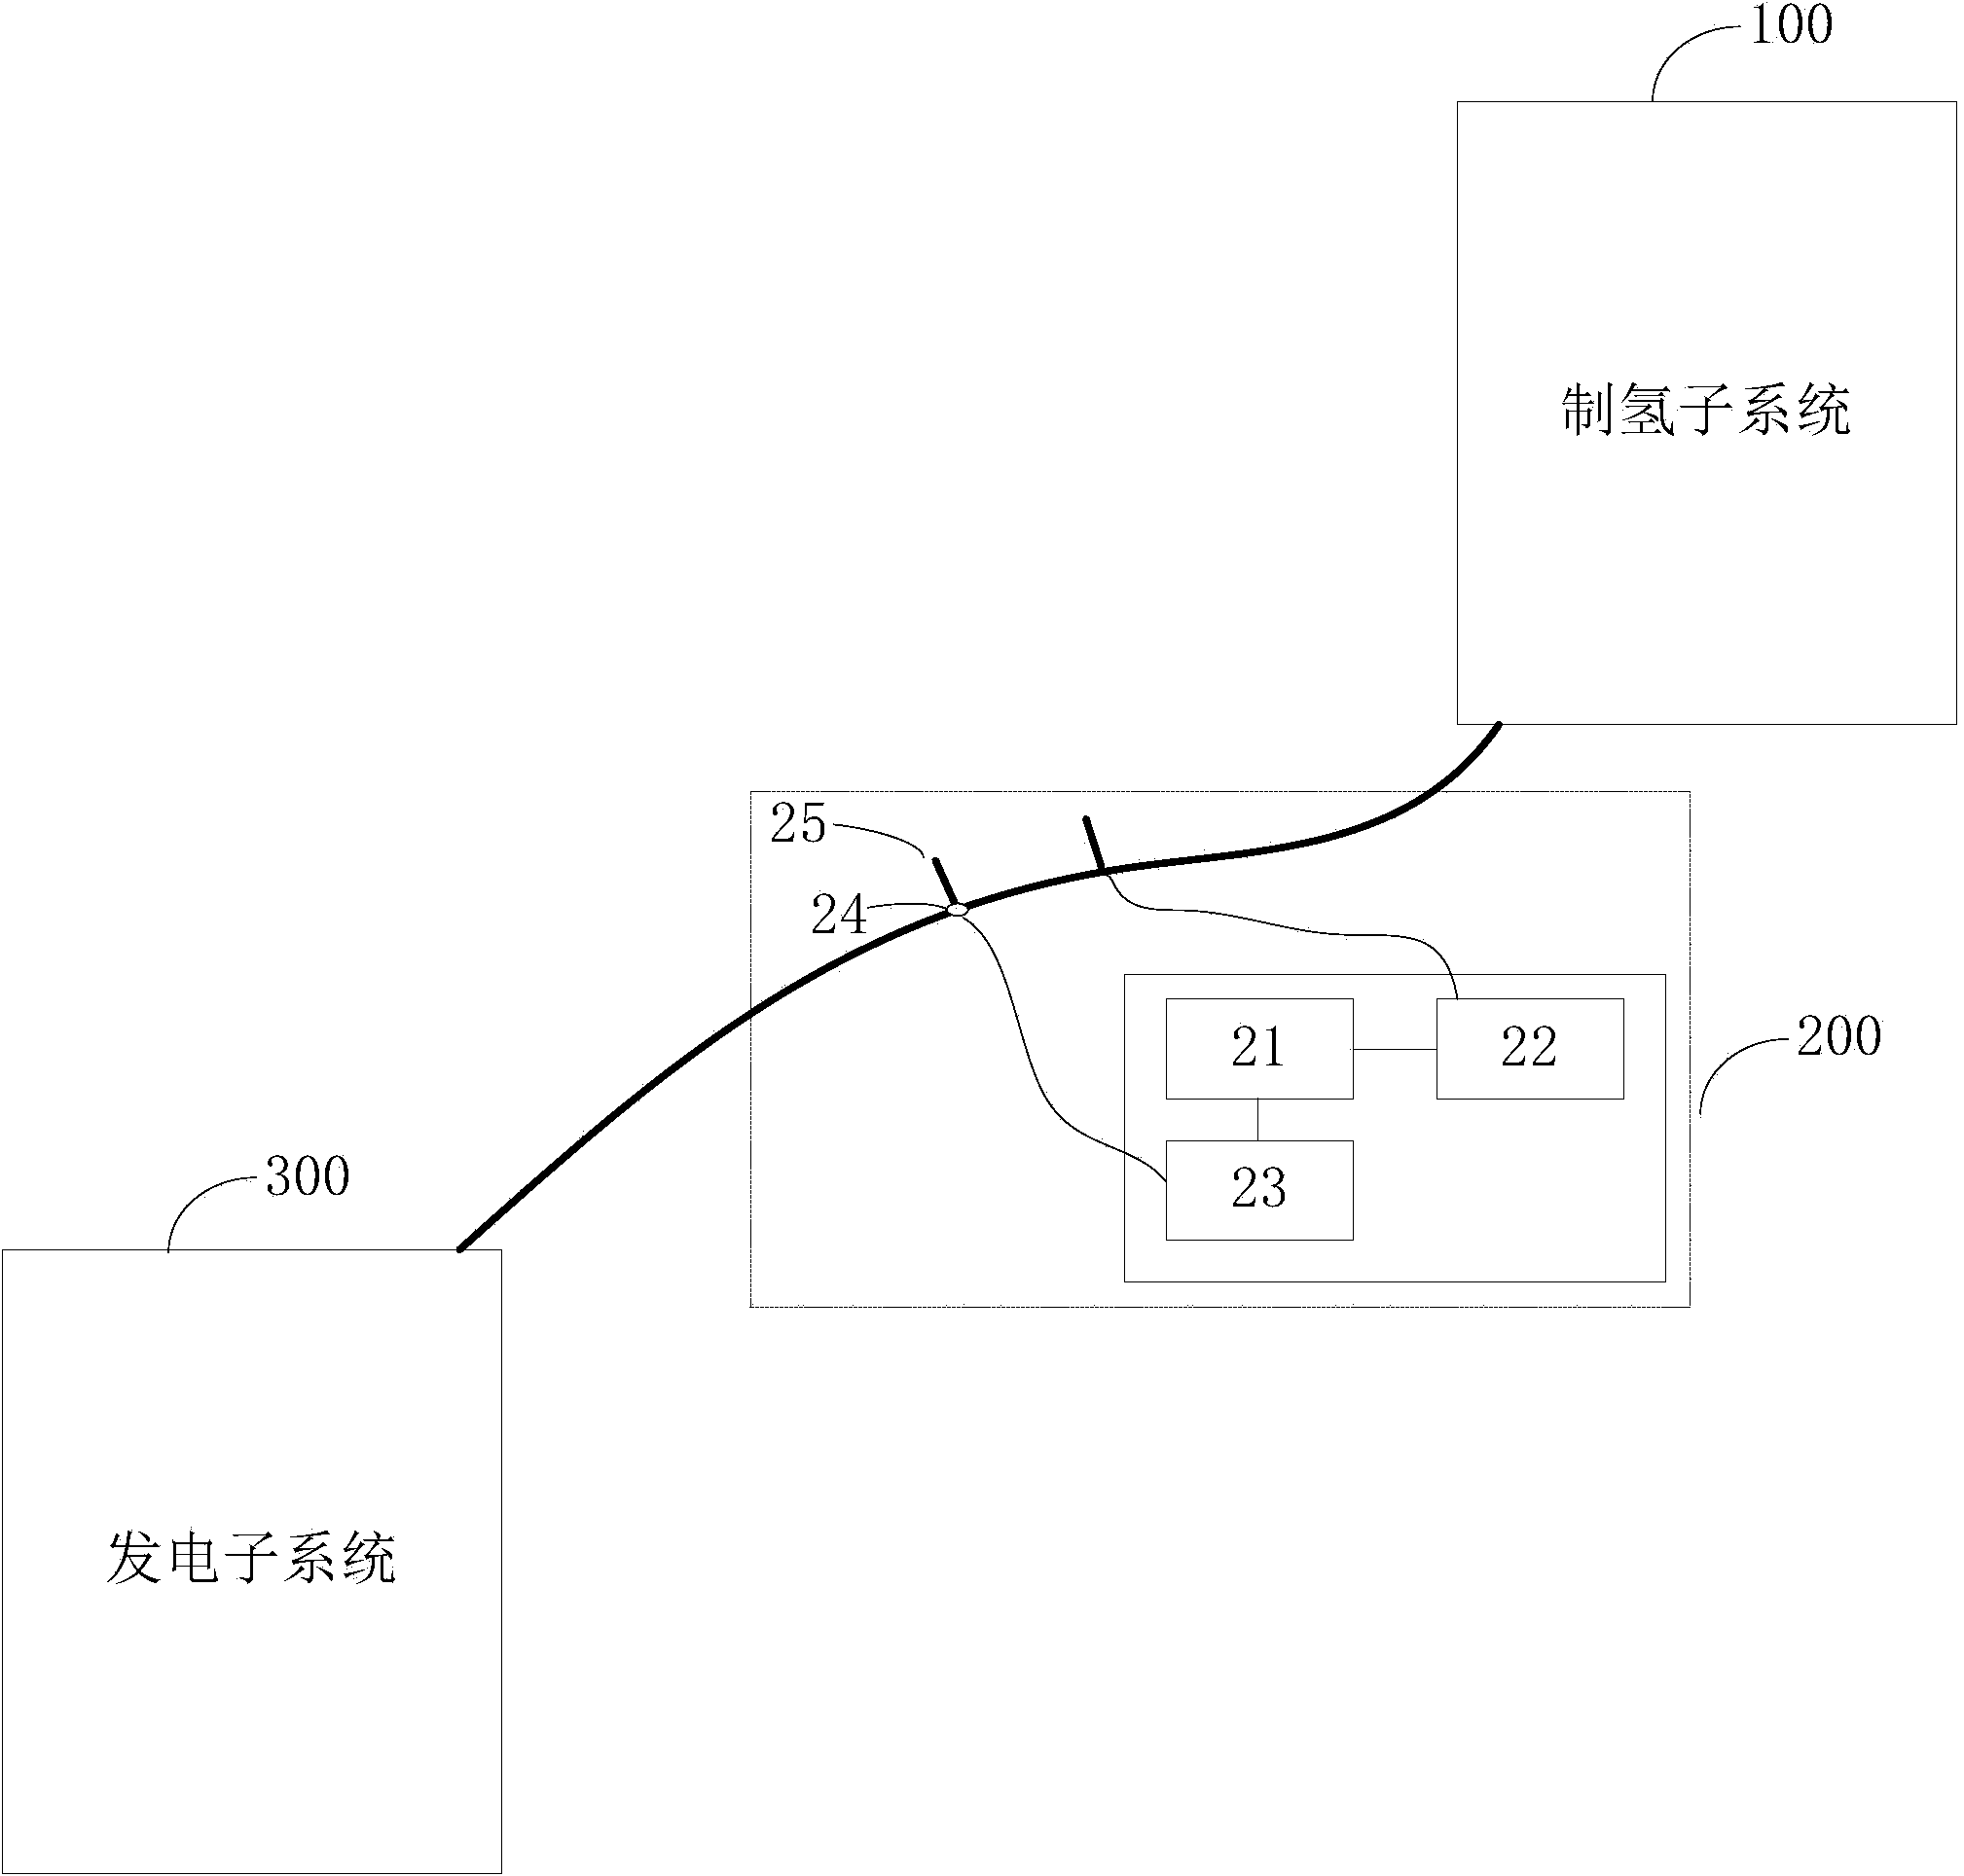 Instant hydrogen-production power generation system and method